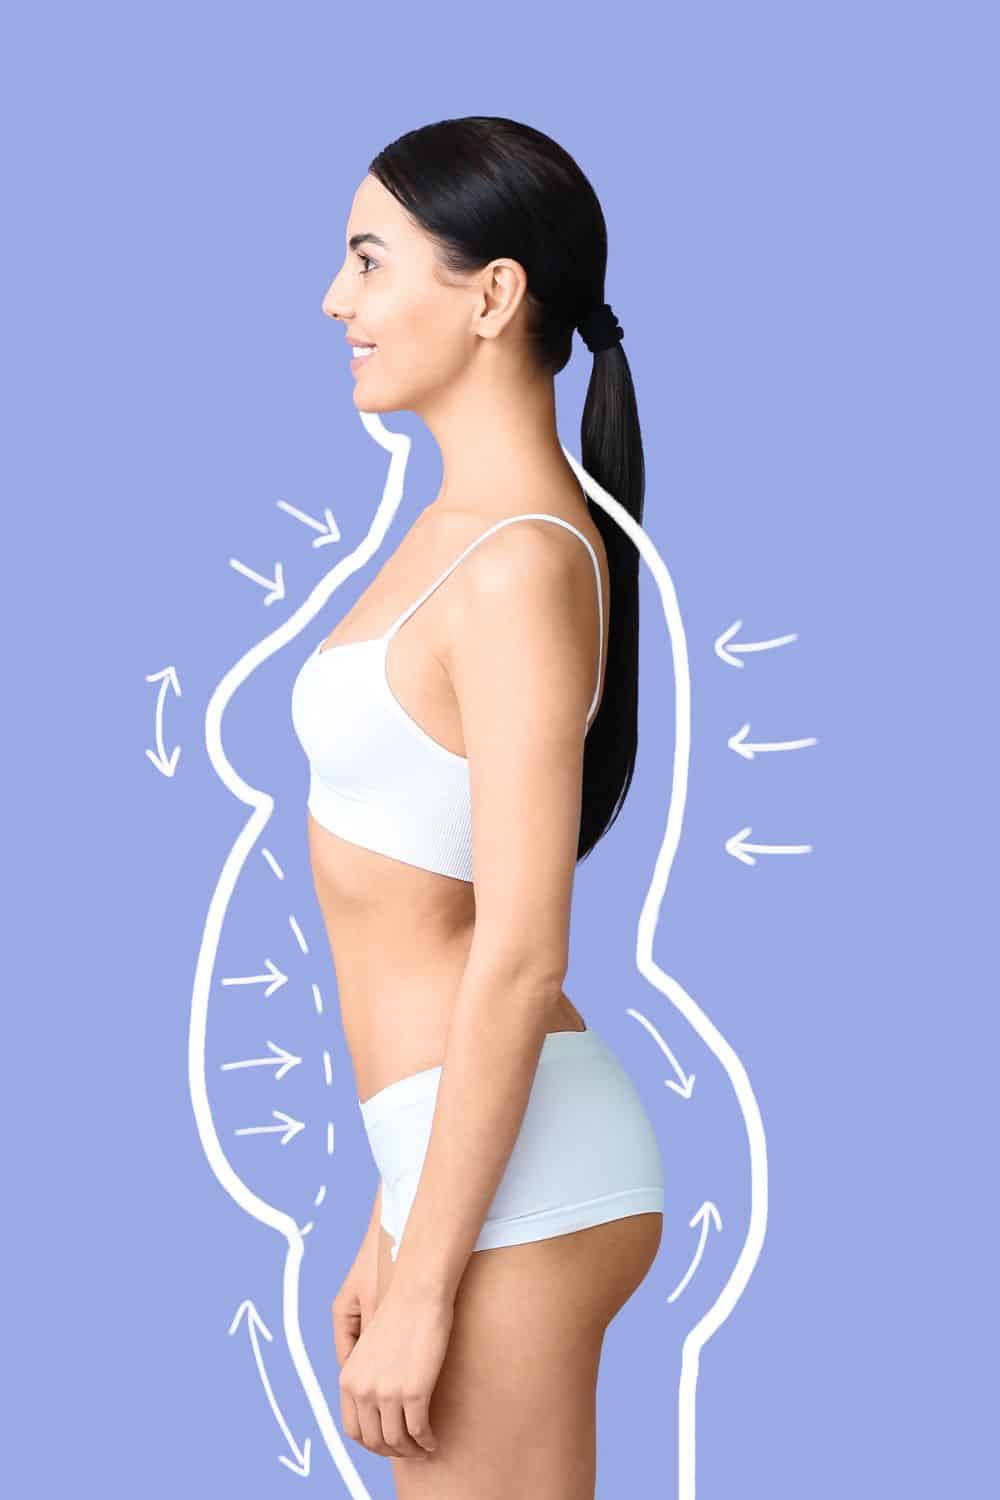 Woman standing sideways with outline of weight loss around her.